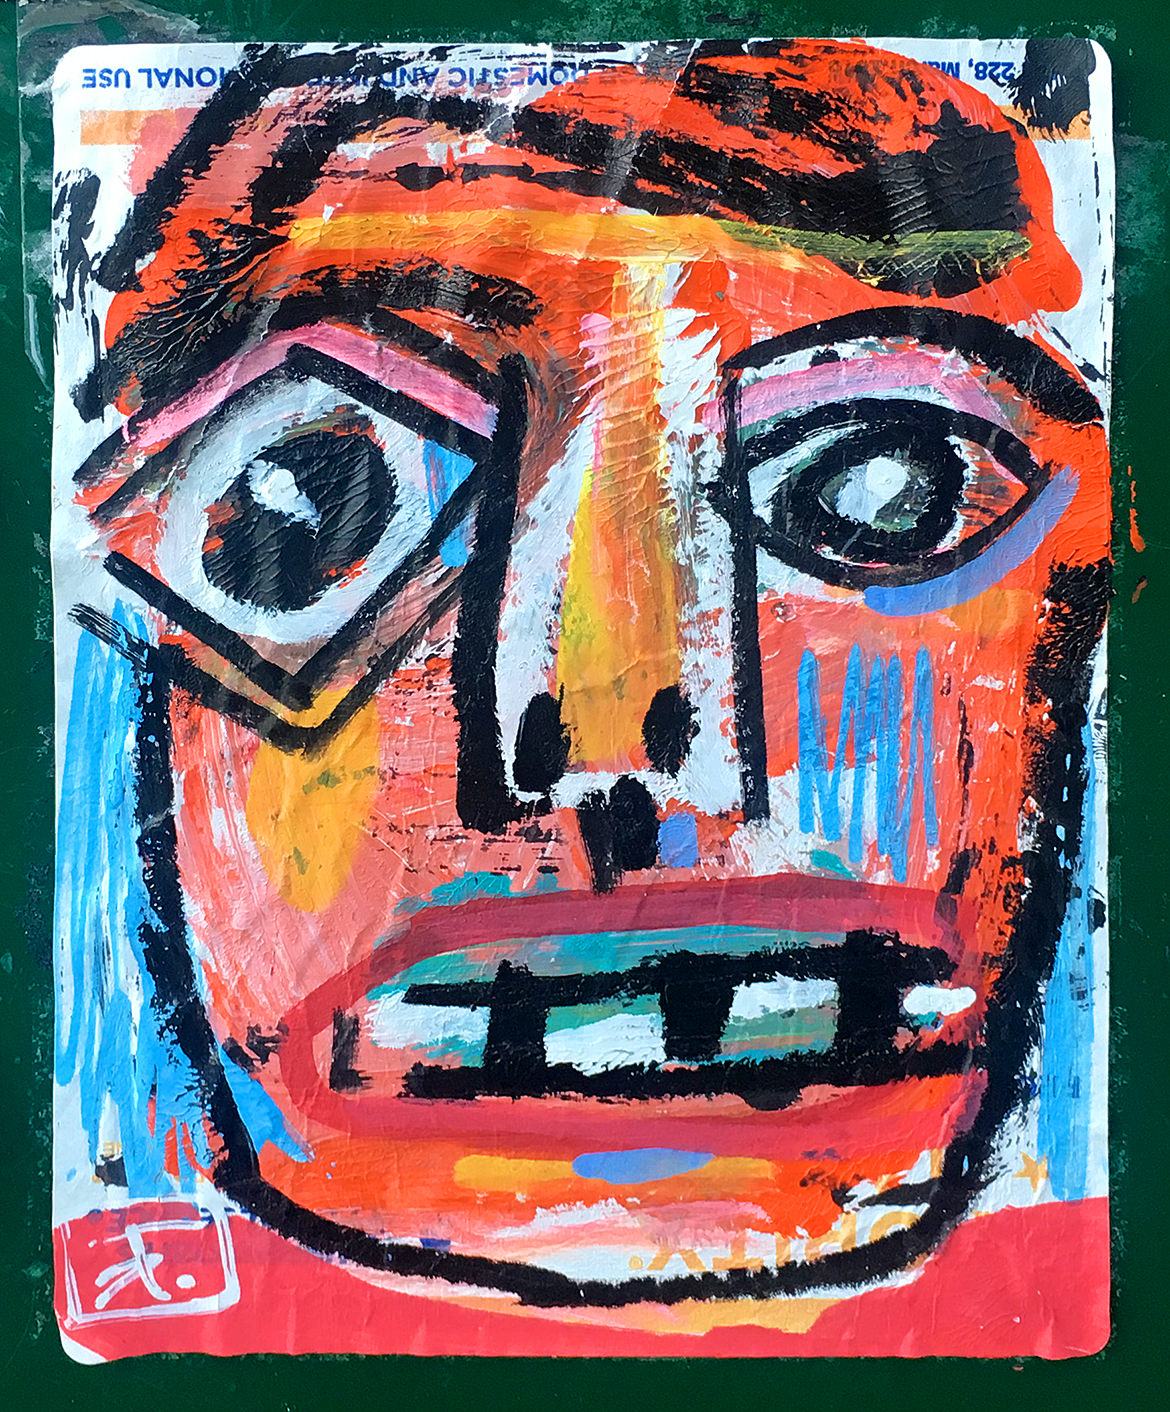 a colorful painted wide eyed face on a postal address label sticker